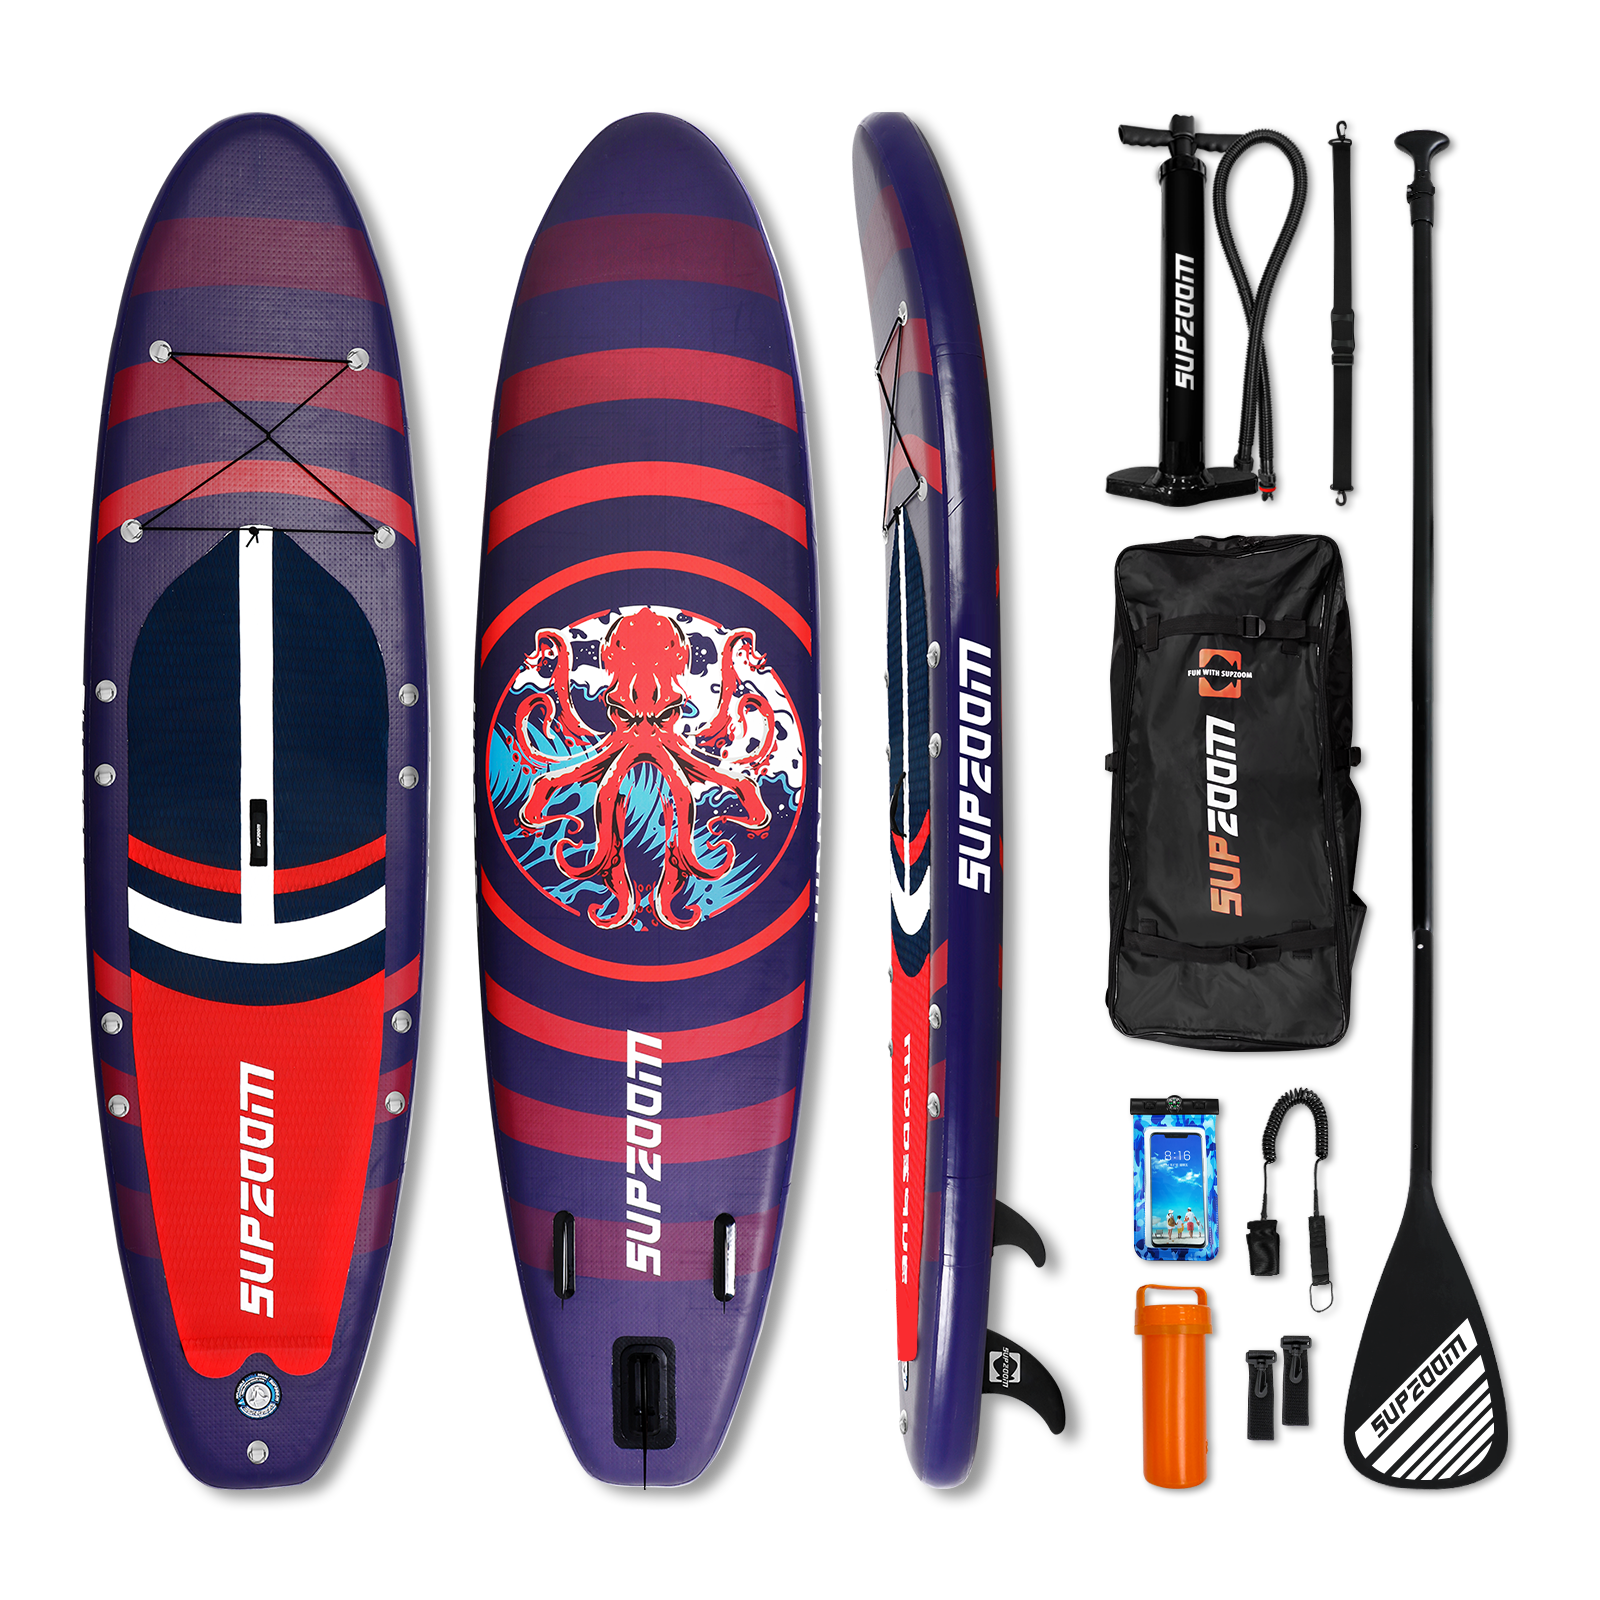 All round 10'6" inflatable stand up paddle board | Supzoom octopus style